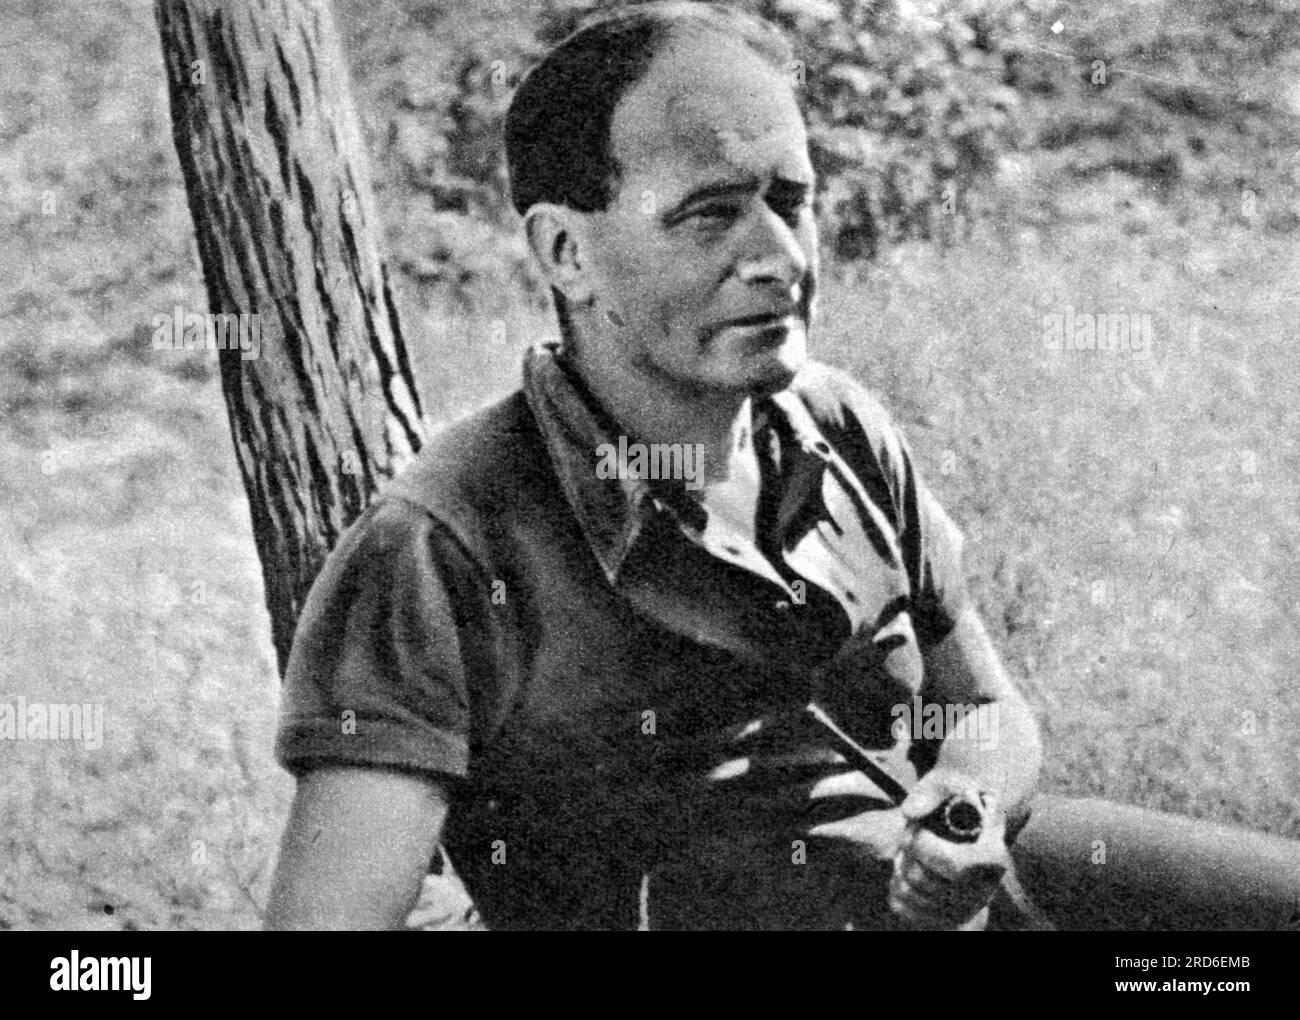 Wolf, Friedrich, 23.12.1888 - 5.10.1953, German author / writer, 1930s, ADDITIONAL-RIGHTS-CLEARANCE-INFO-NOT-AVAILABLE Stock Photo